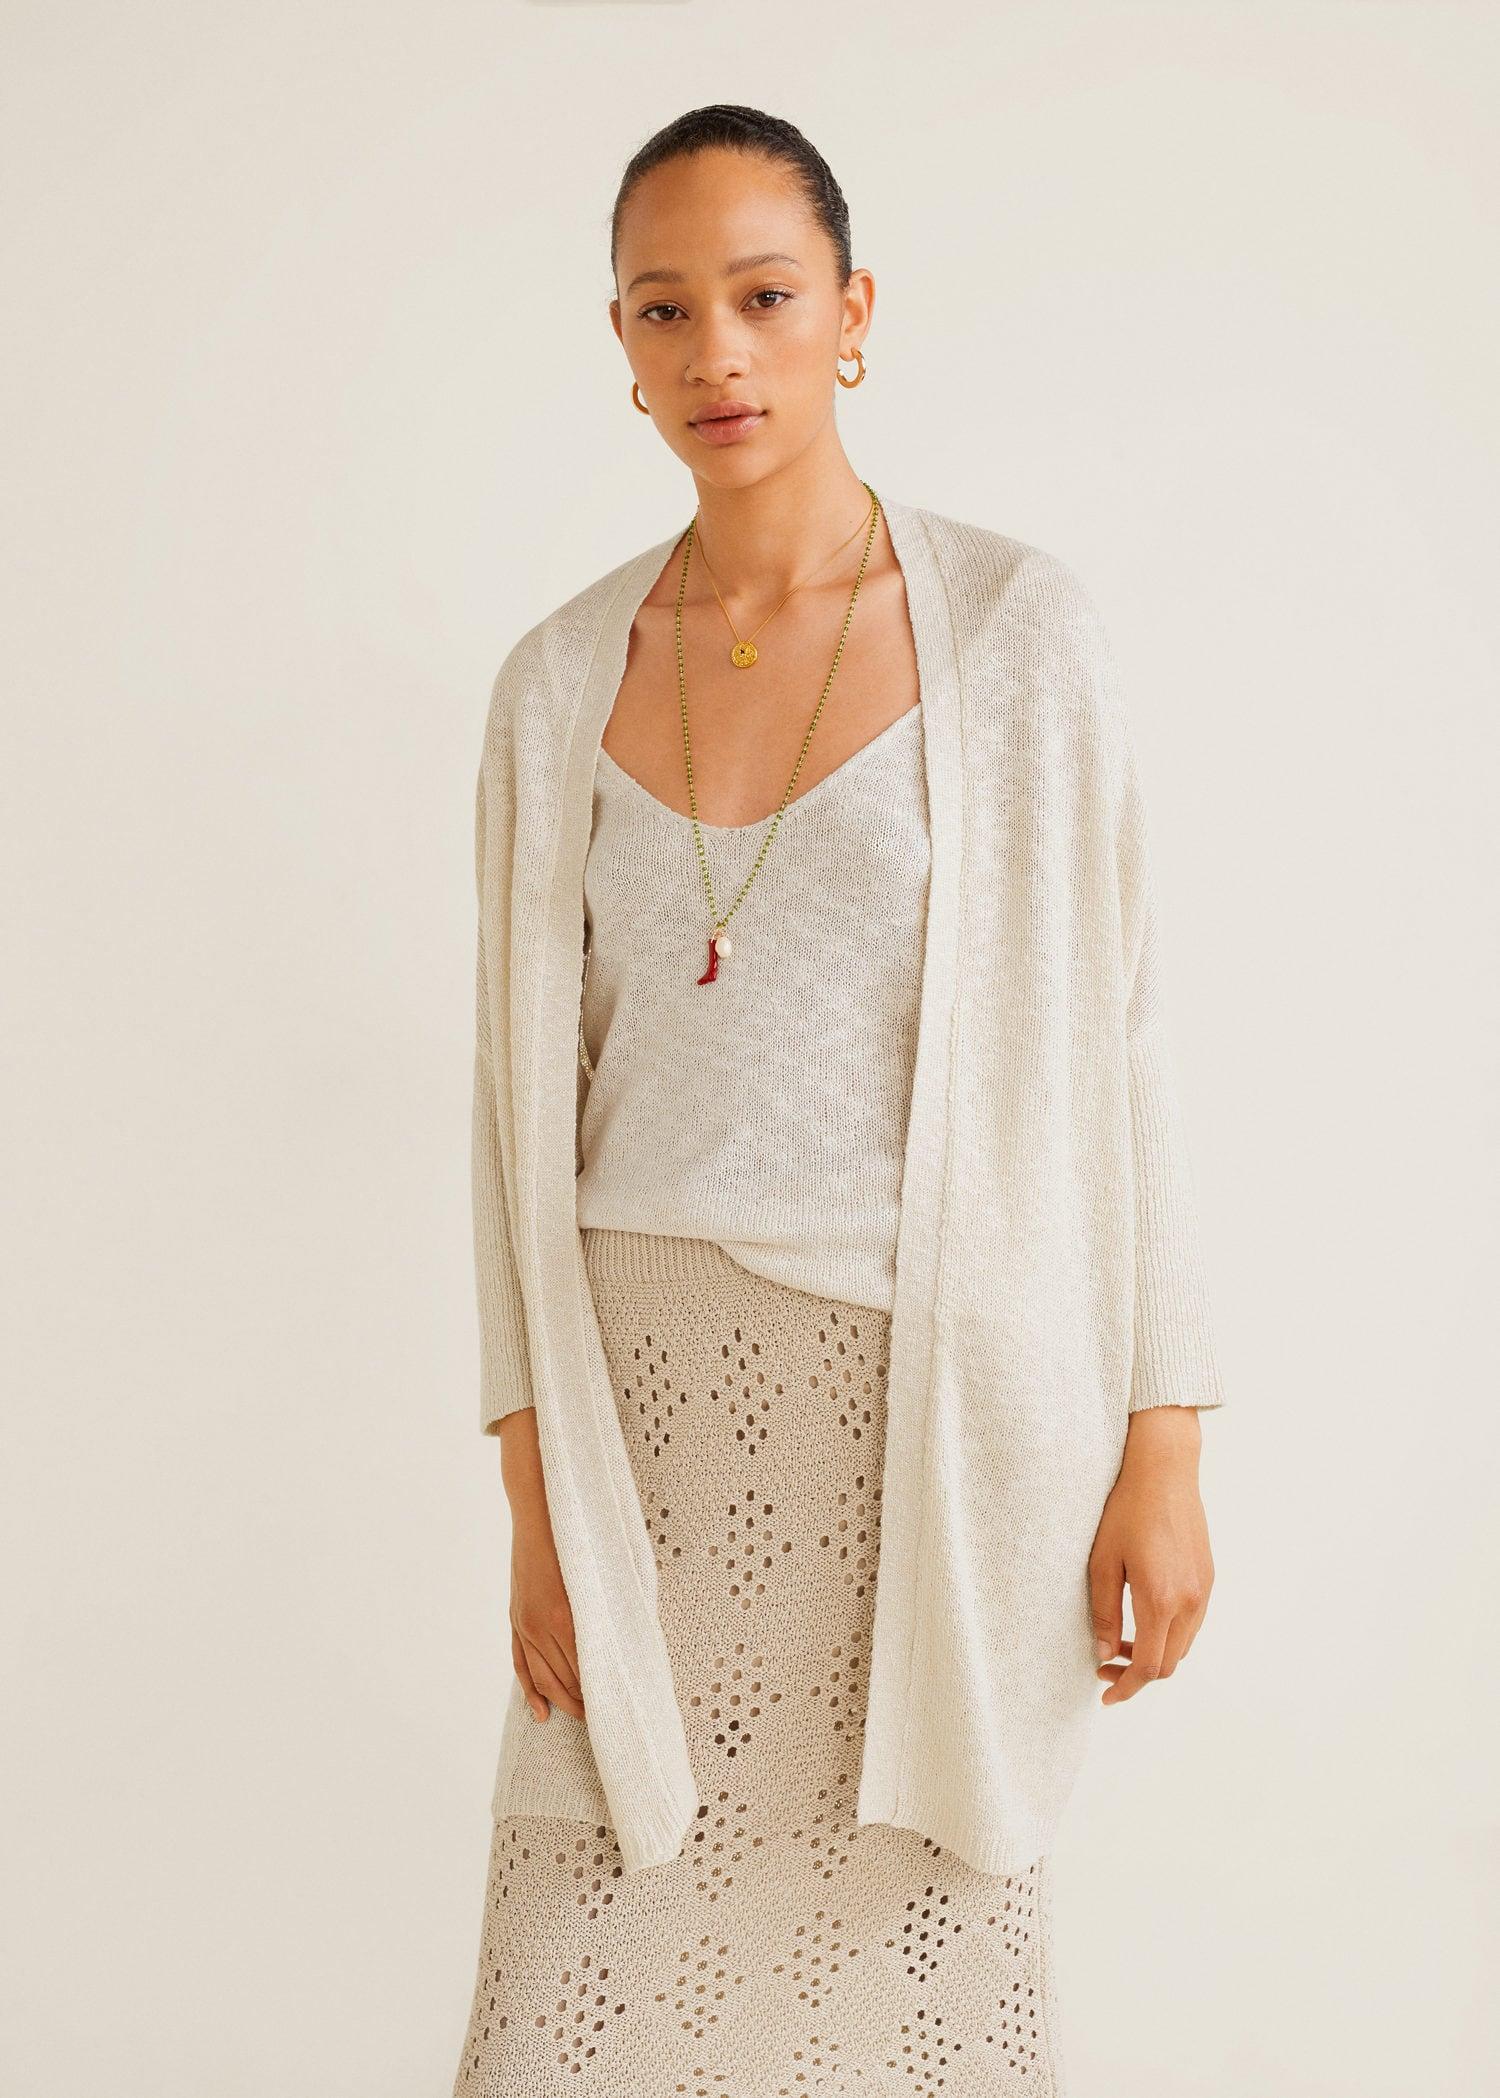 Mango Open Knit Cardigan in Natural - Lyst